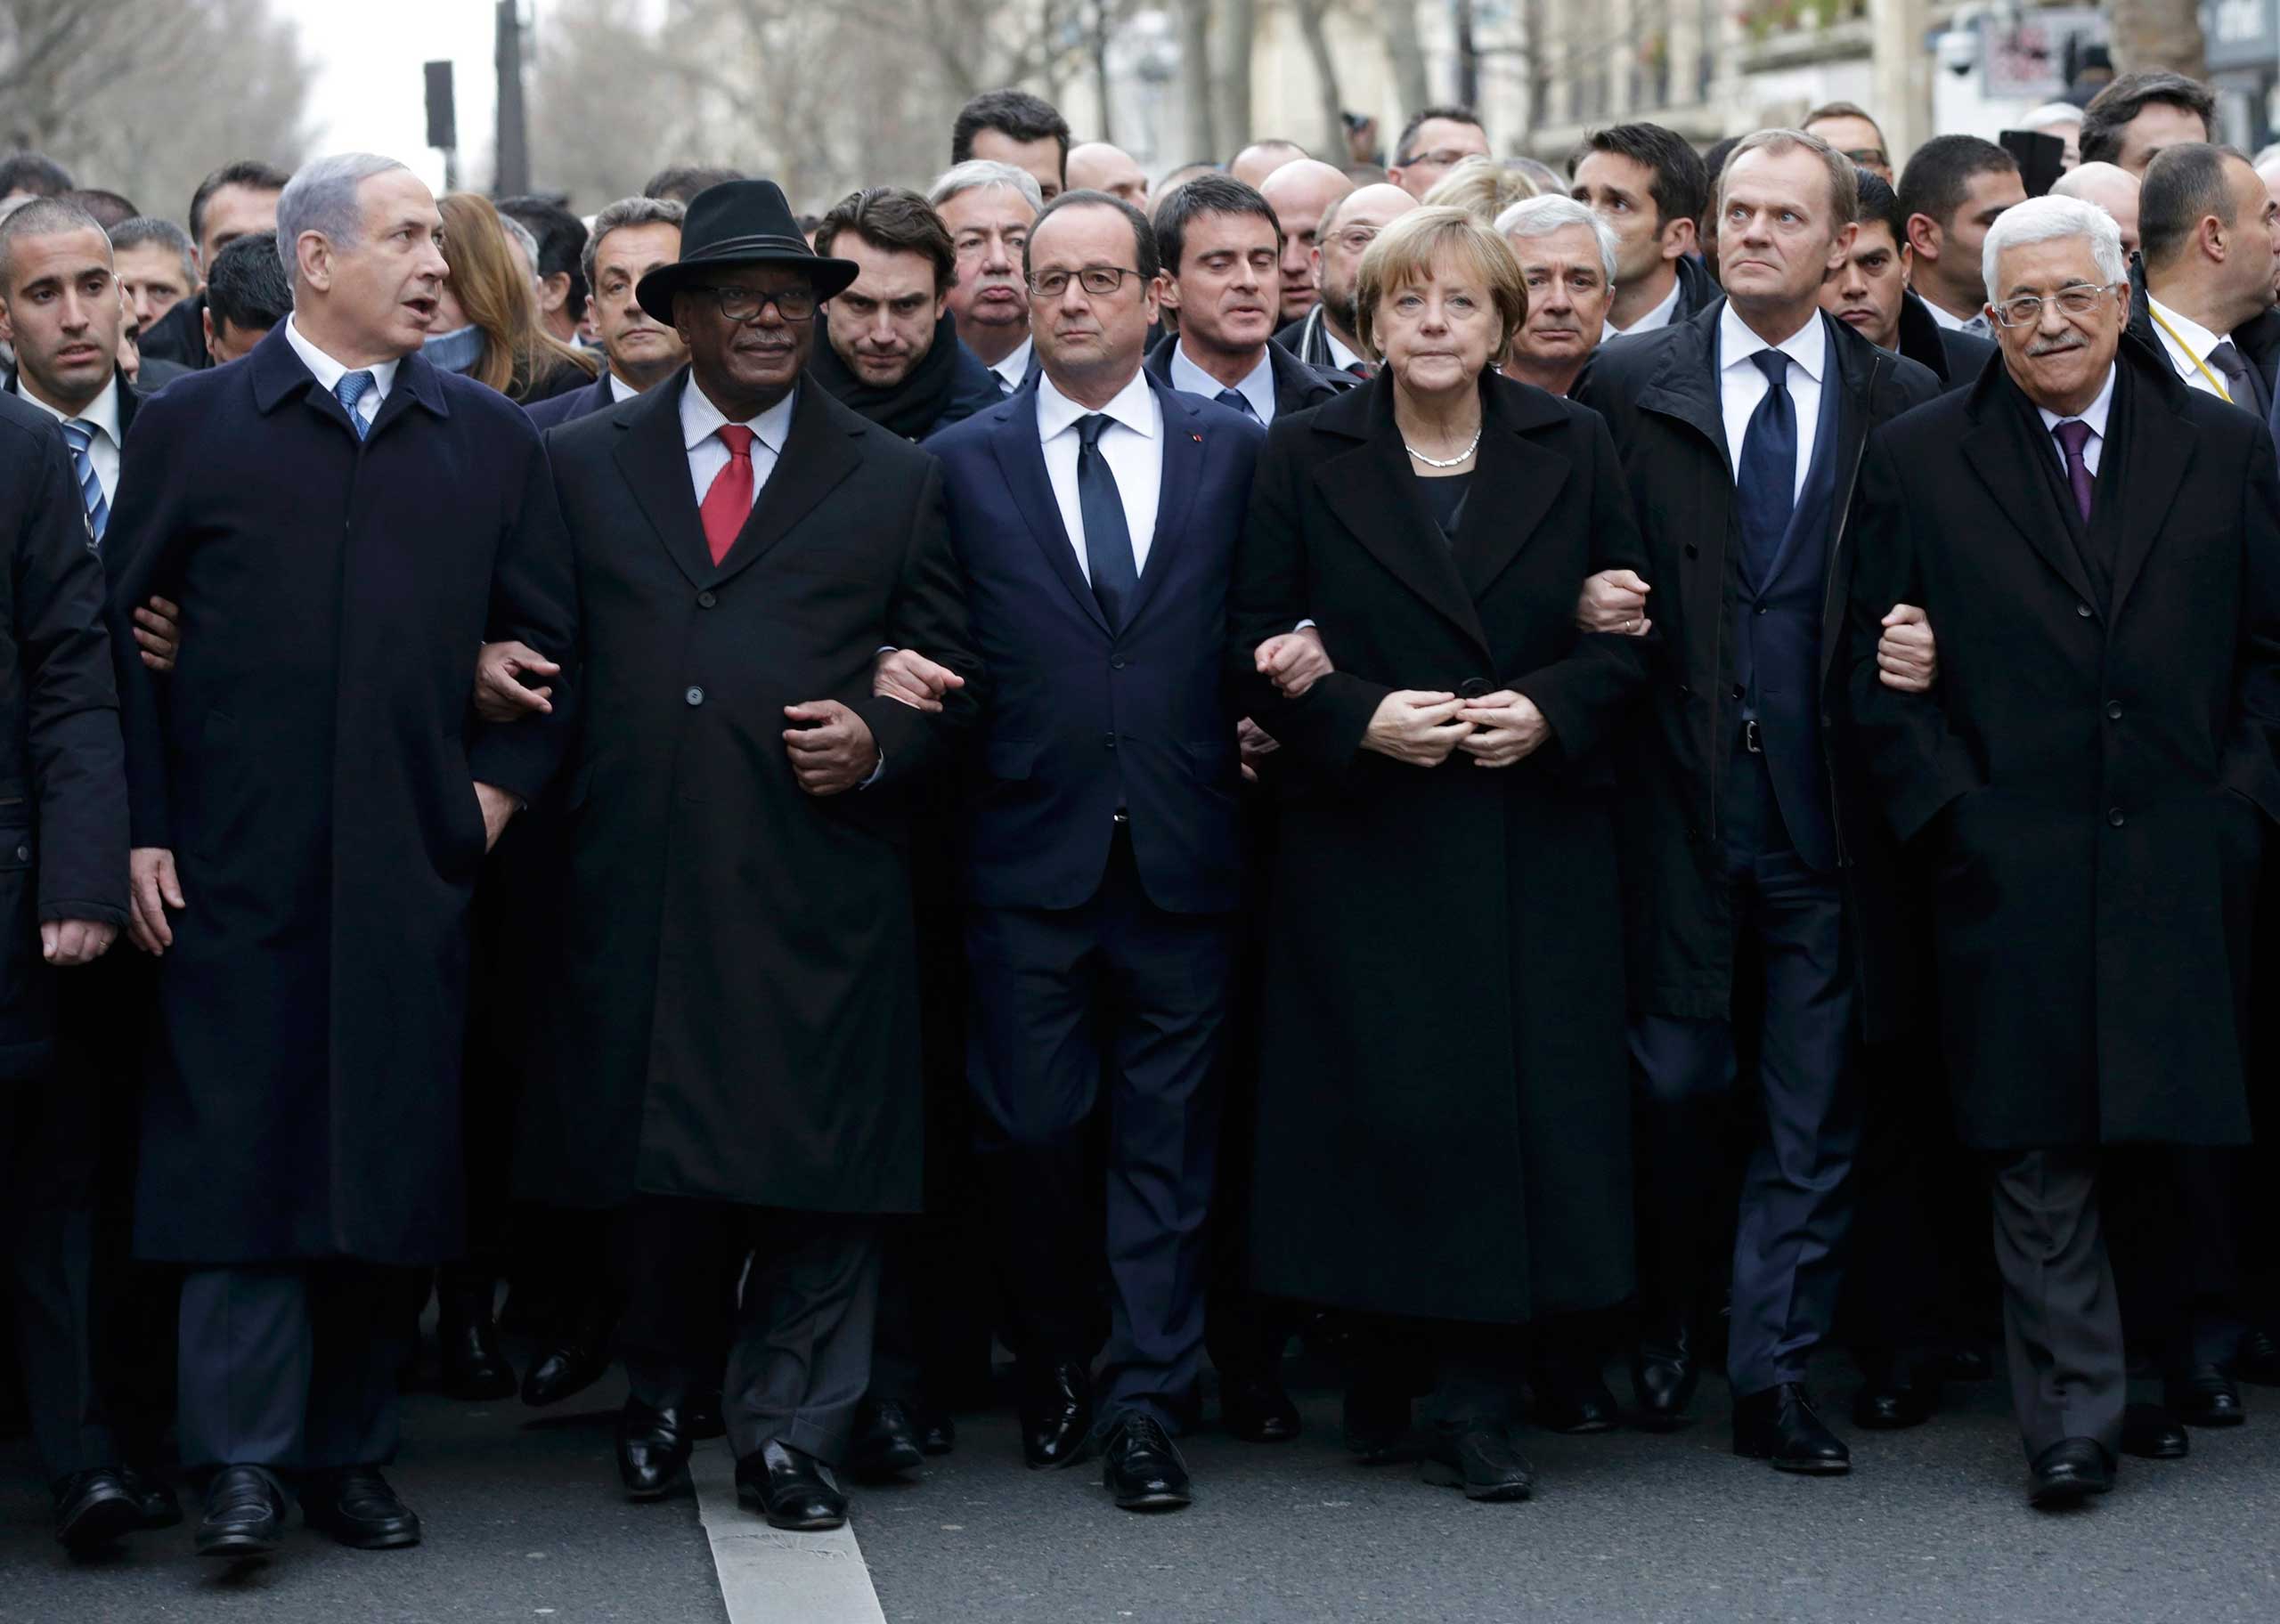 French President Francois Hollande is surrounded by head of states including Israel's Prime Minister Benjamin Netanyahu, Mali's President Ibrahim Boubacar Keita, Germany's Chancellor Angela Merkel, European Council President Donald Tusk and Palestinian President Mahmoud Abbas as they attend the solidarity march in the streets of Paris Jan. 11, 2015. (Philippe Wojazer—Reuters)